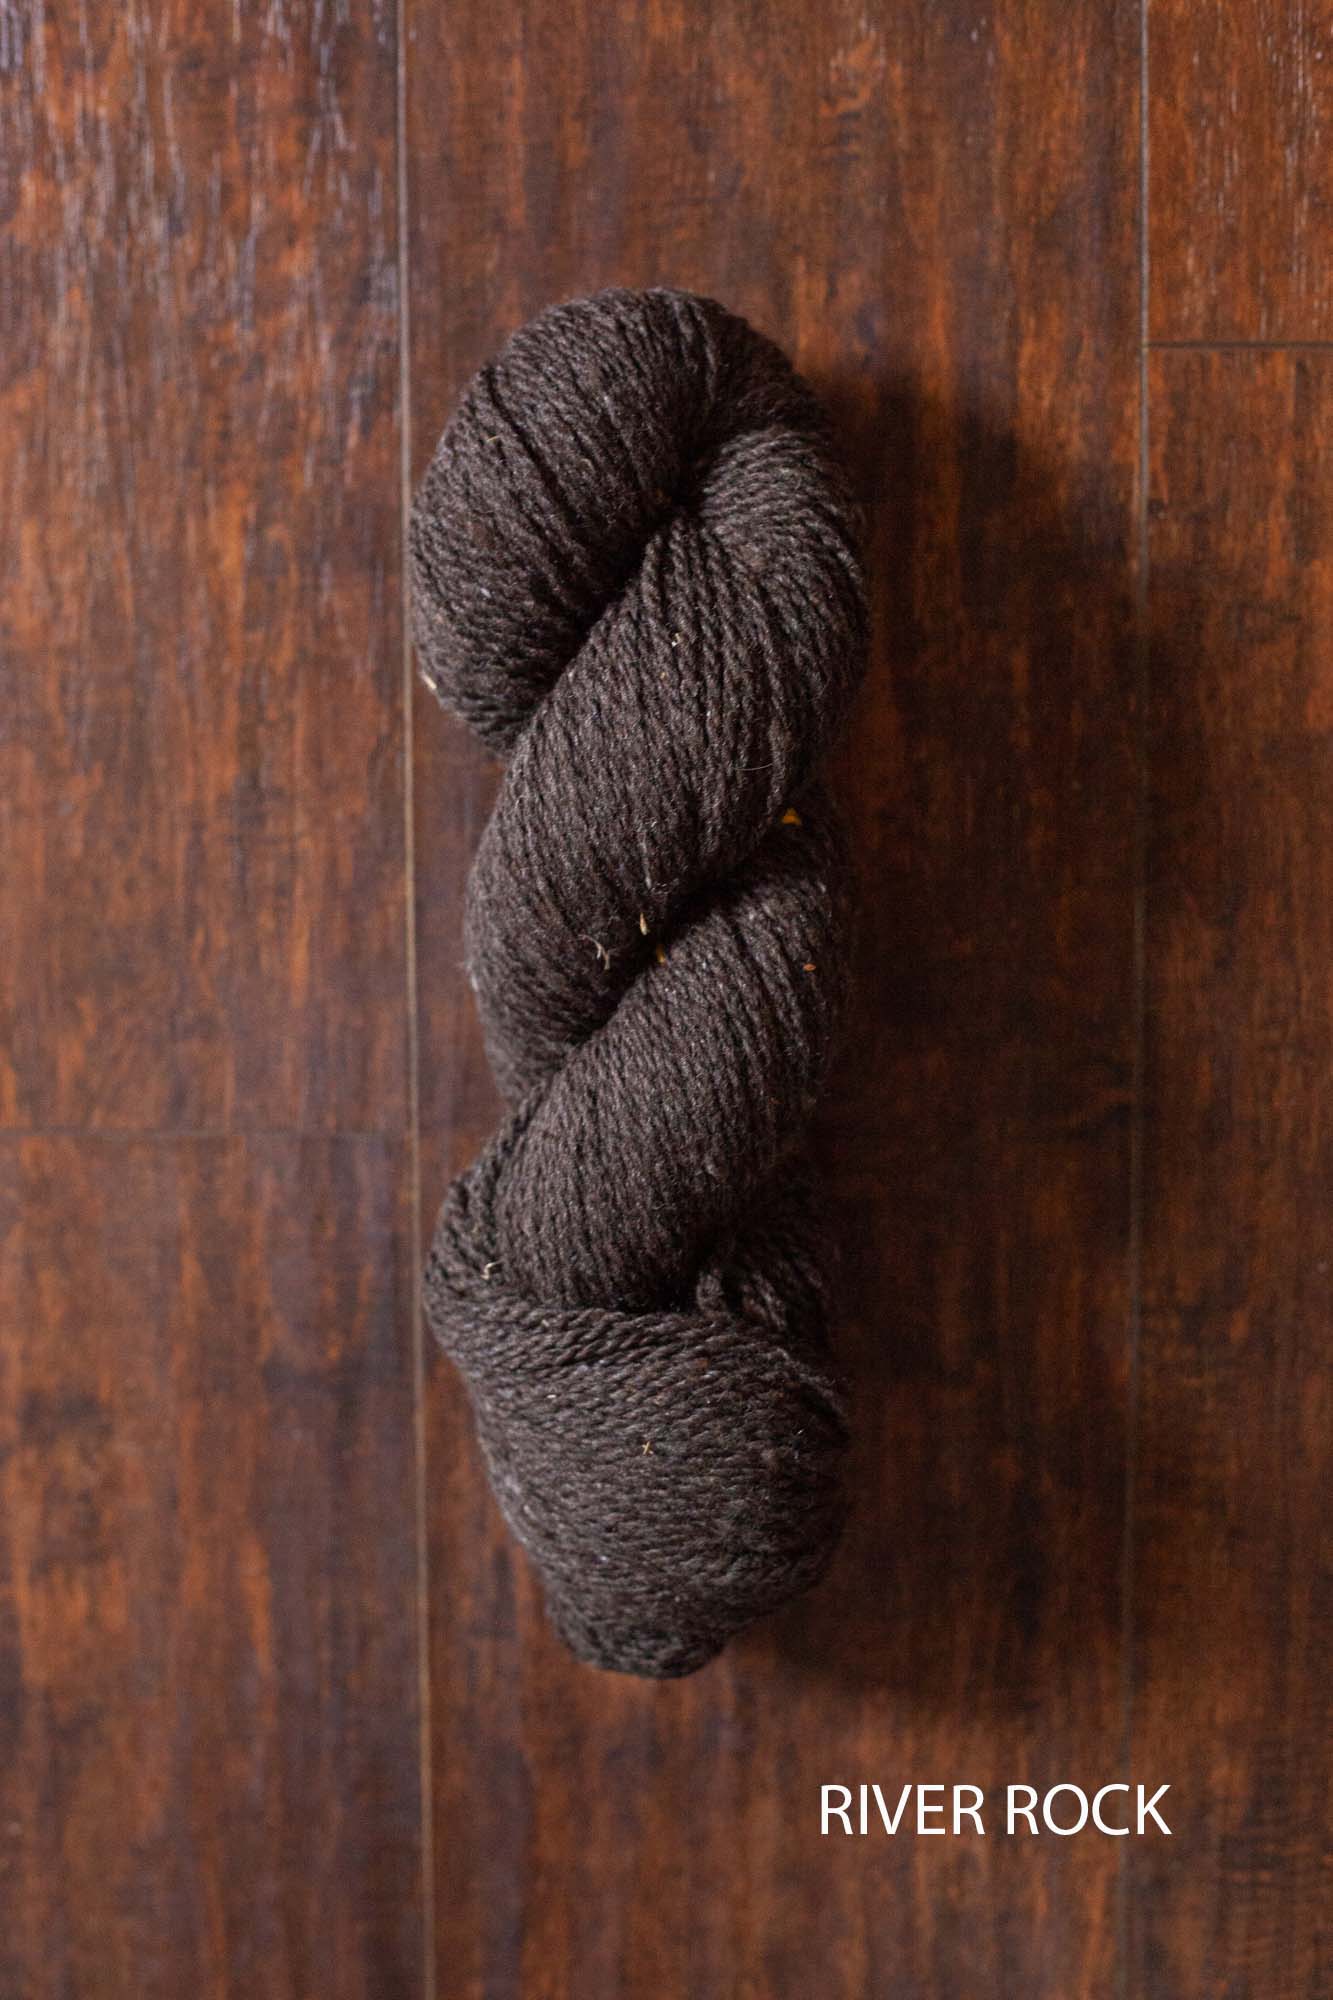 Stone Soup Worsted <br><small>combination of wool</small>